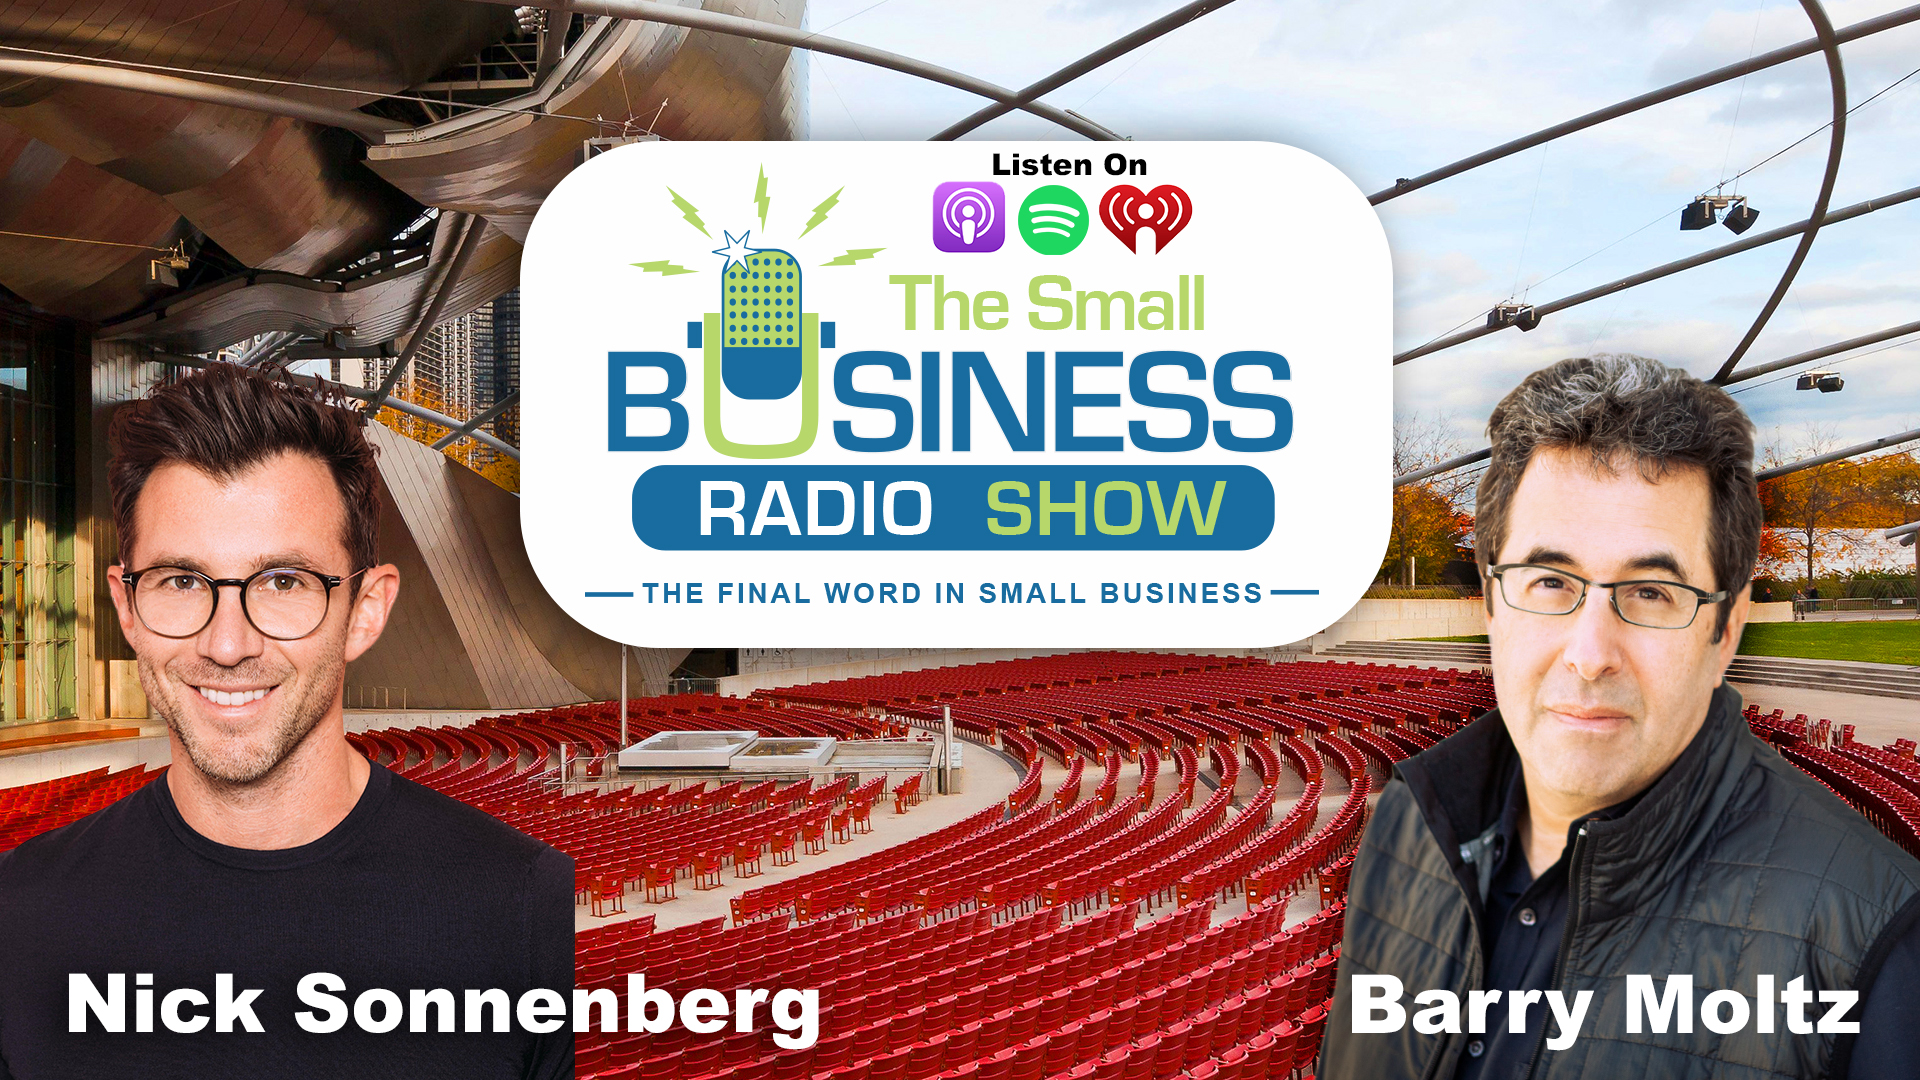 Nick Sonnenberg on The Small Business Radio Show